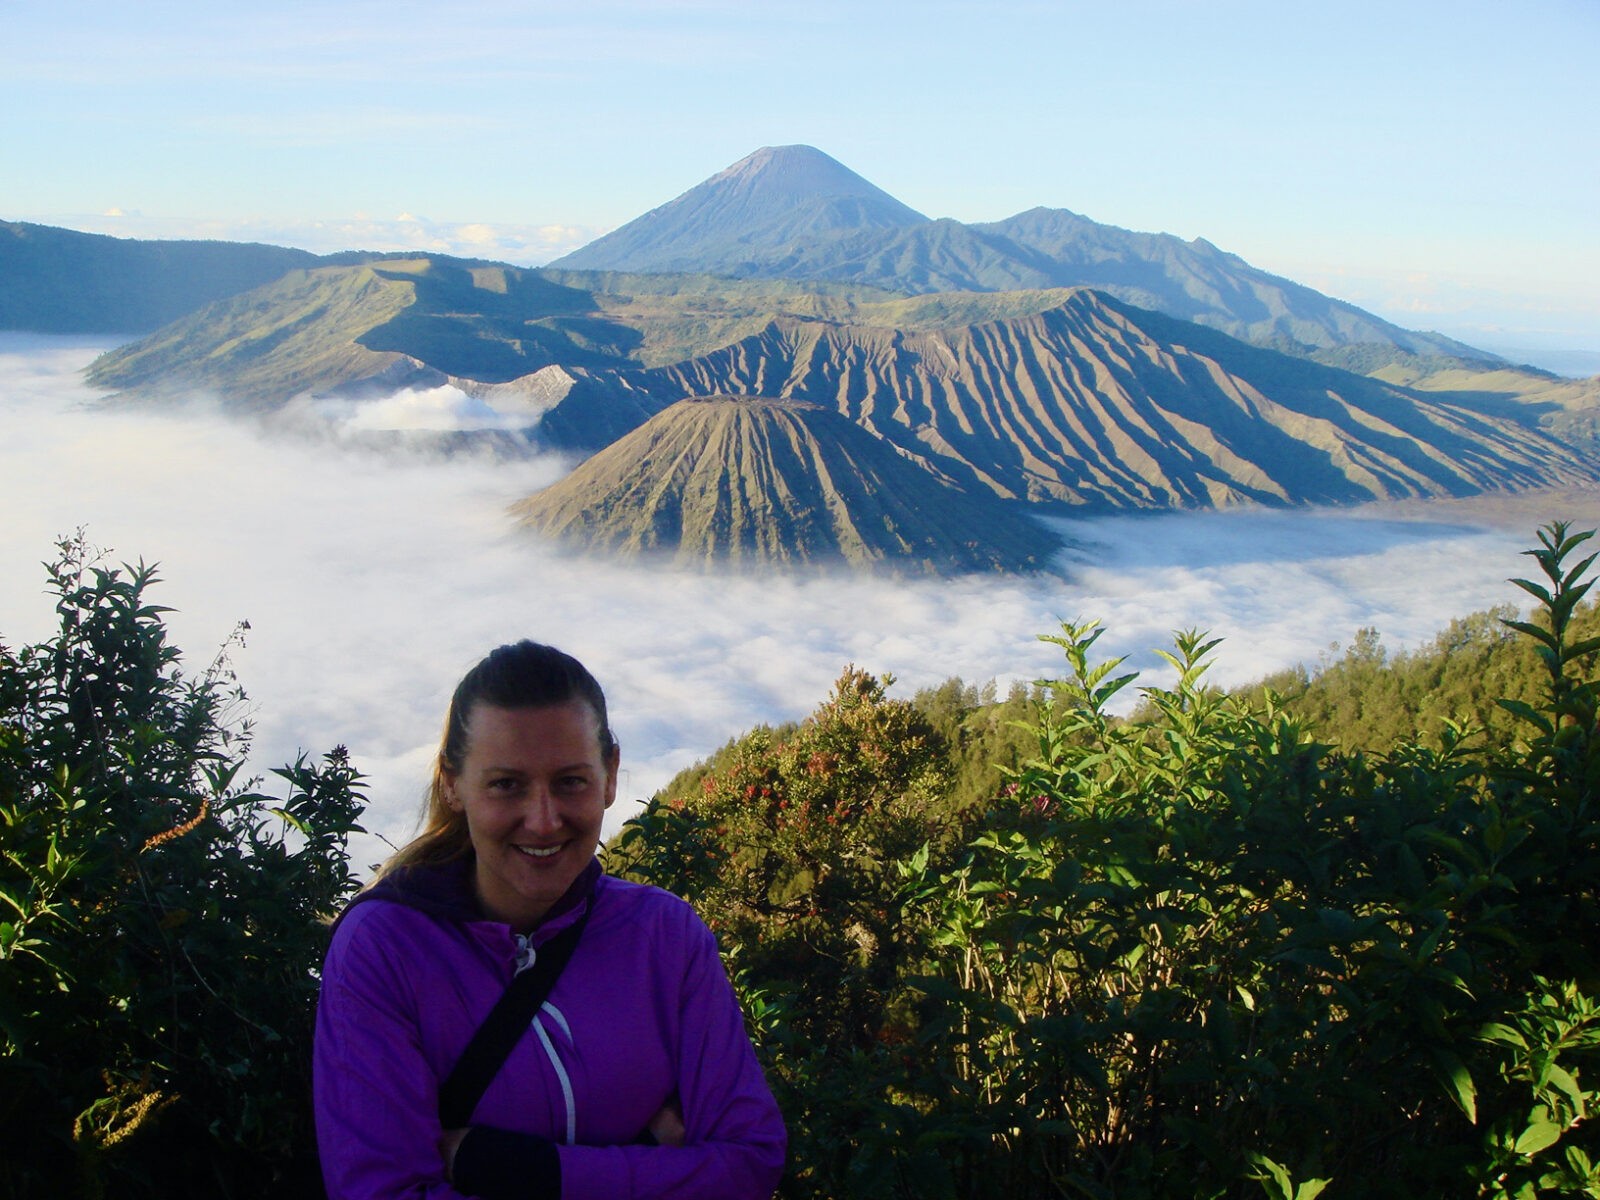 Me with view on Bromo volcano